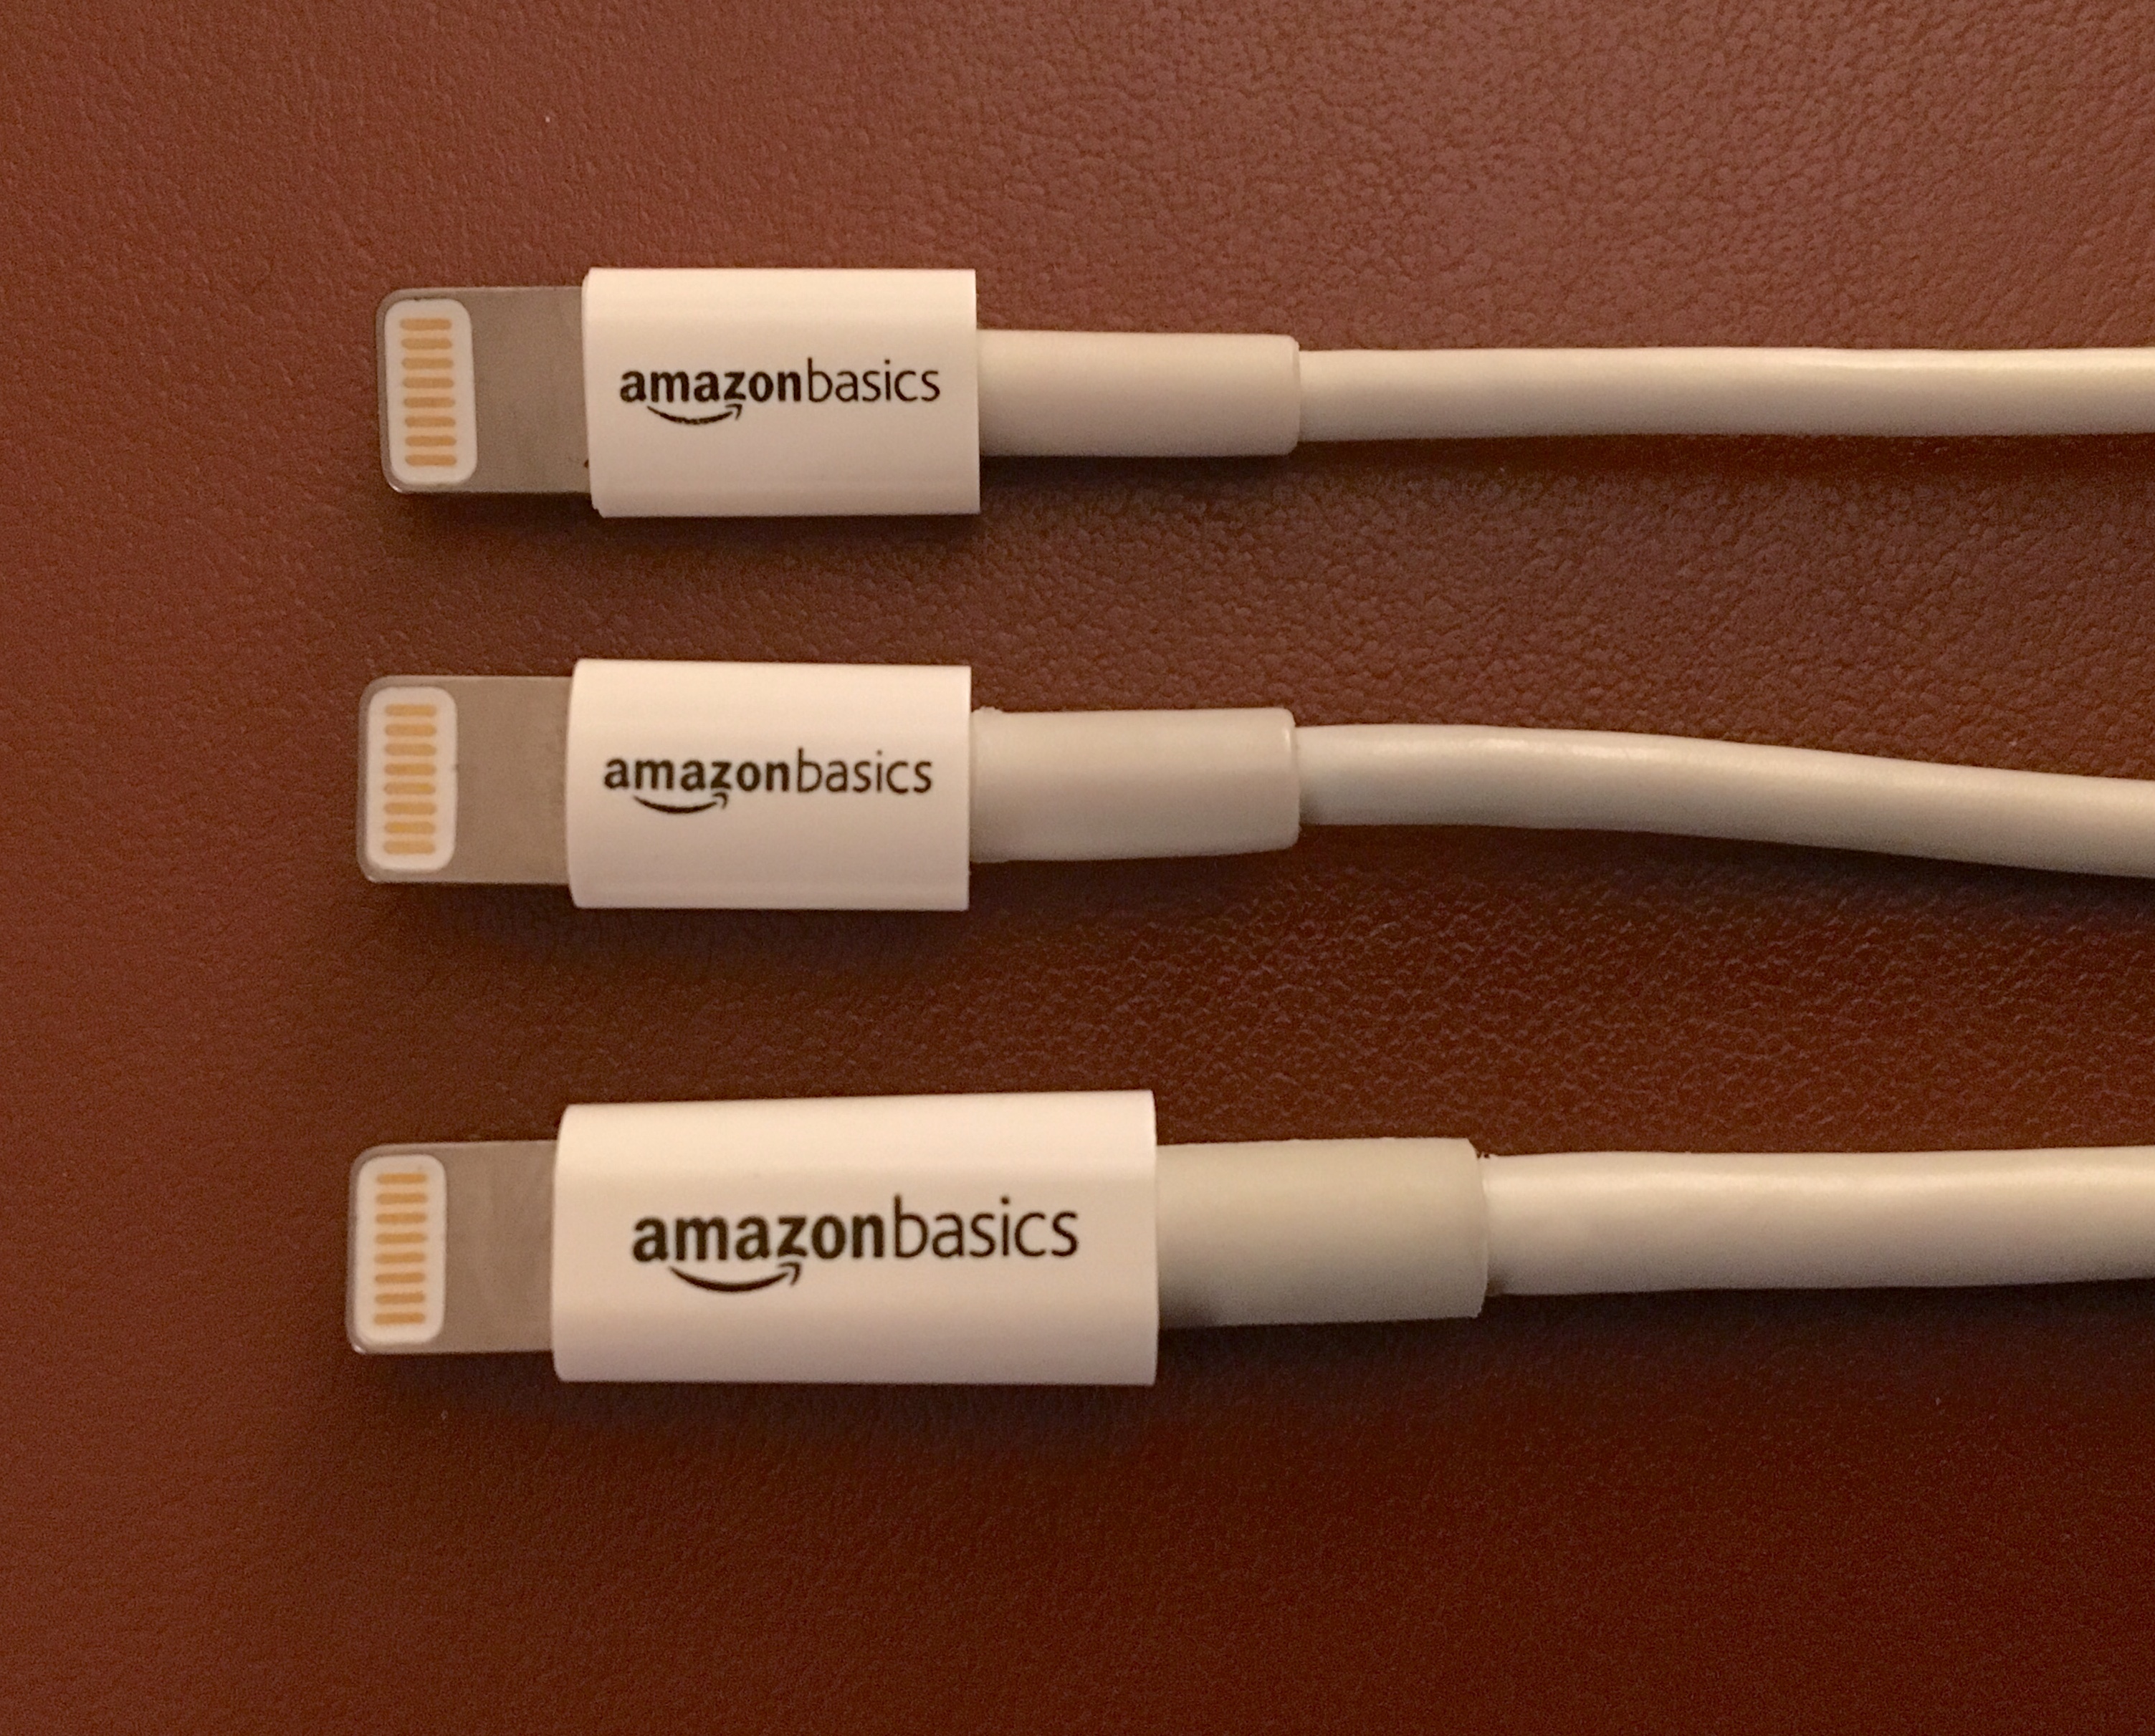 Amazon 3-ft, 6-ft, and 10-ft lightning cables